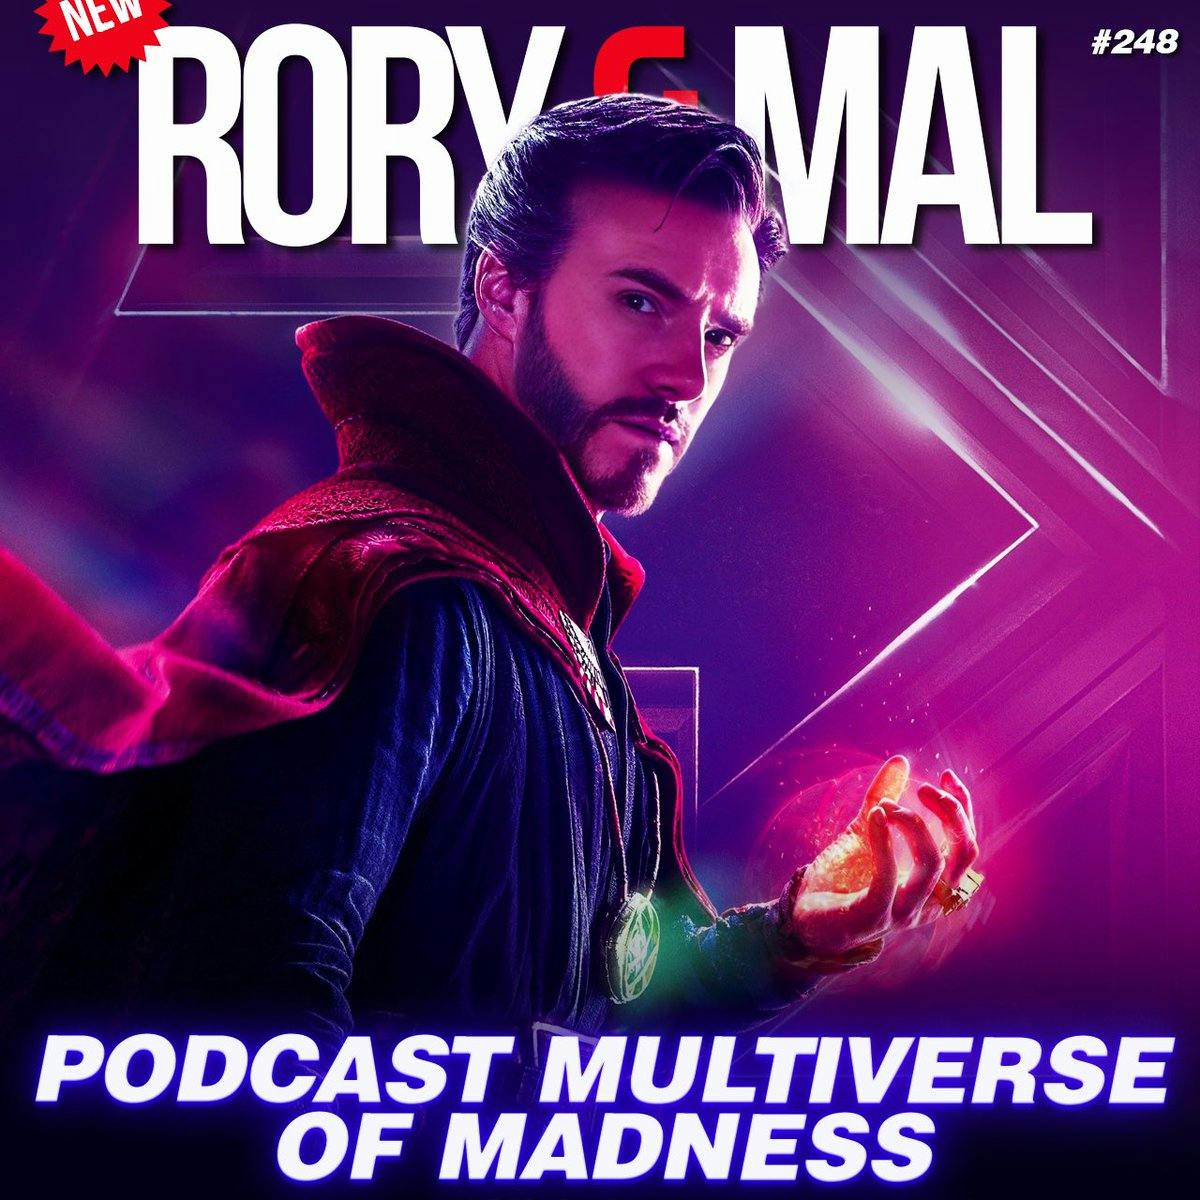 Episode 248 | Podcast Multiverse Of Madness